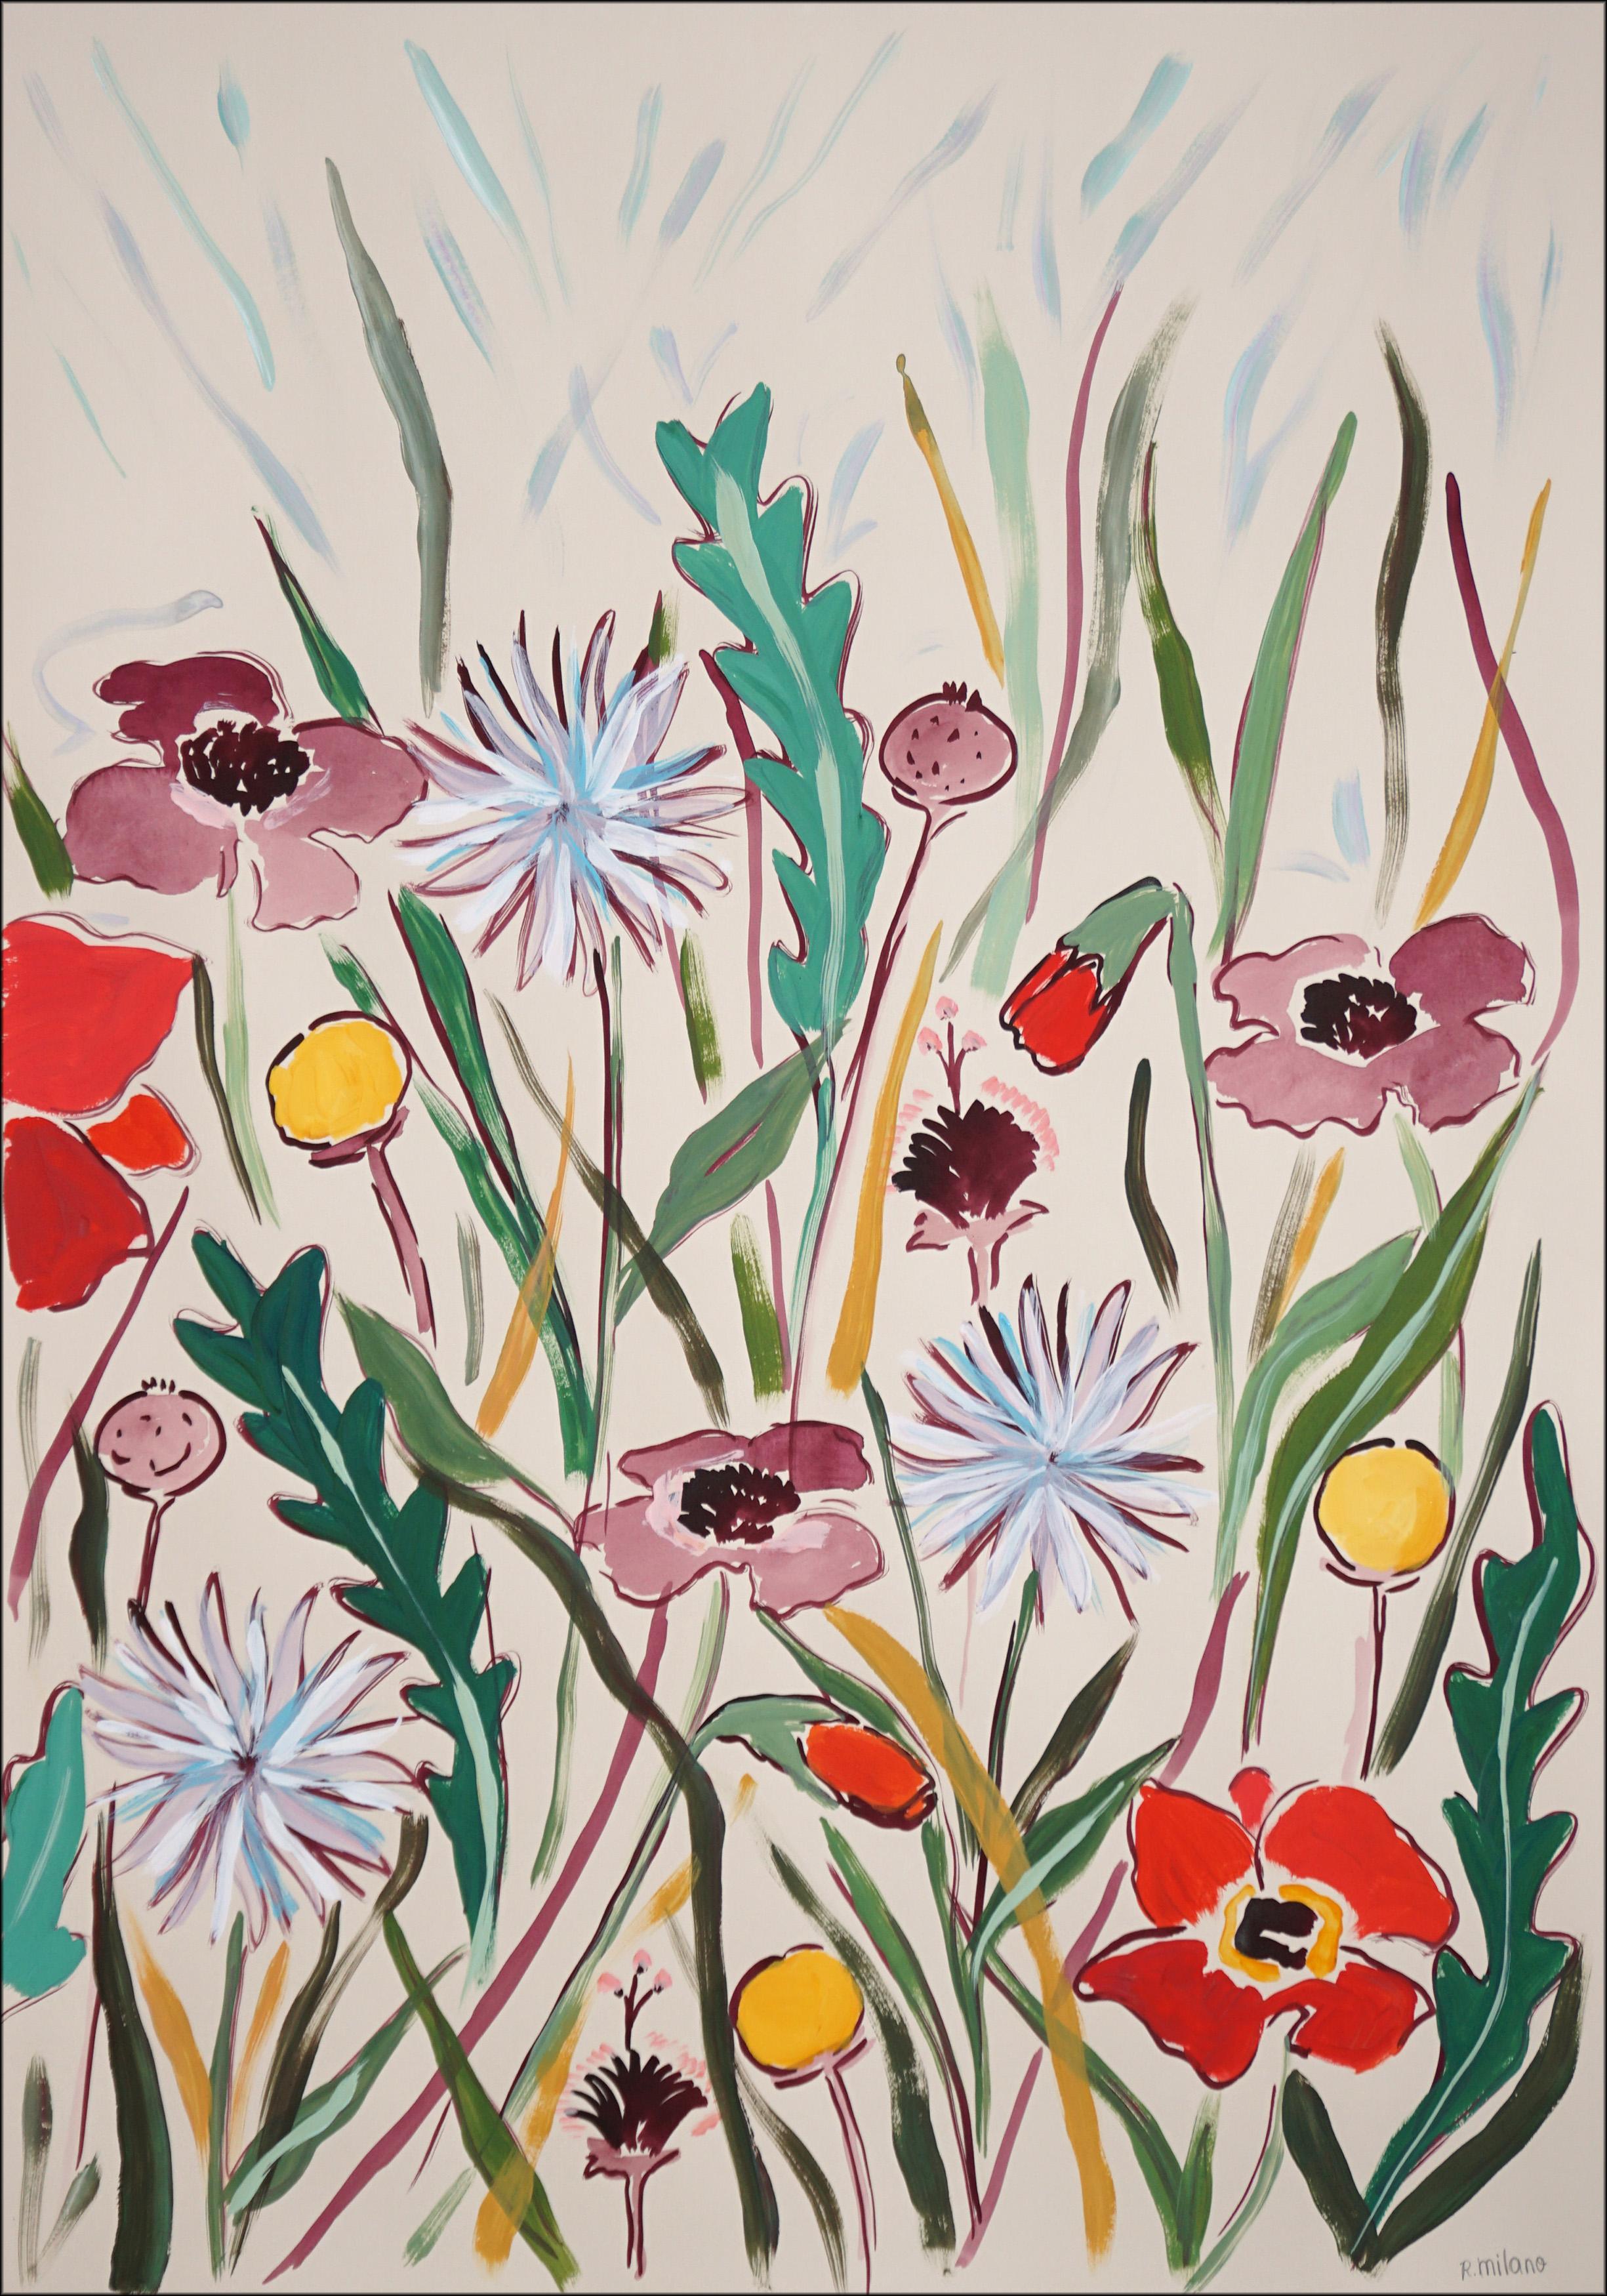 Pastel Wildflowers II, Illustration Style Diptych, Red Poppies and Dandelions  3